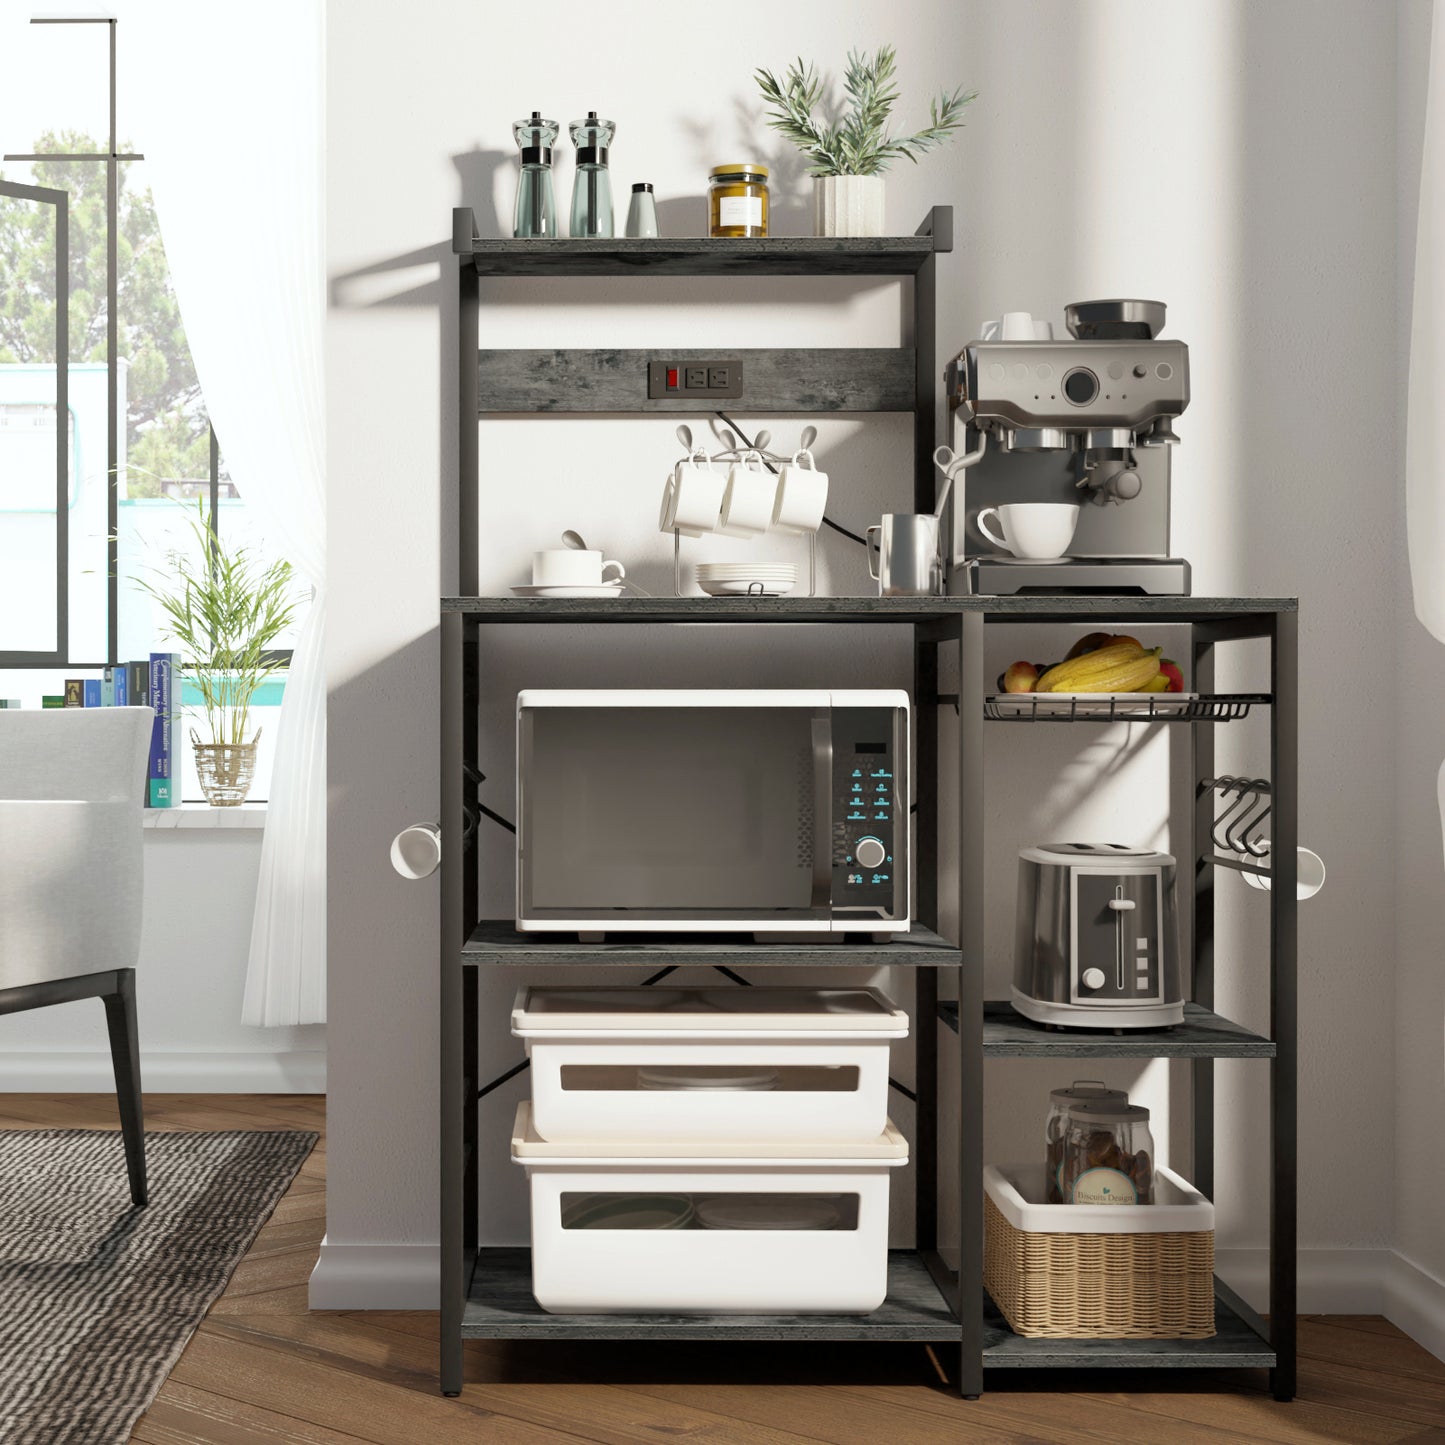 SUPERJARE Bakers Rack with Power Outlet, Microwave Stand, Coffee Bar with Wire Basket, Kitchen Storage Rack with 6 S-Hooks, Charcoal Gray